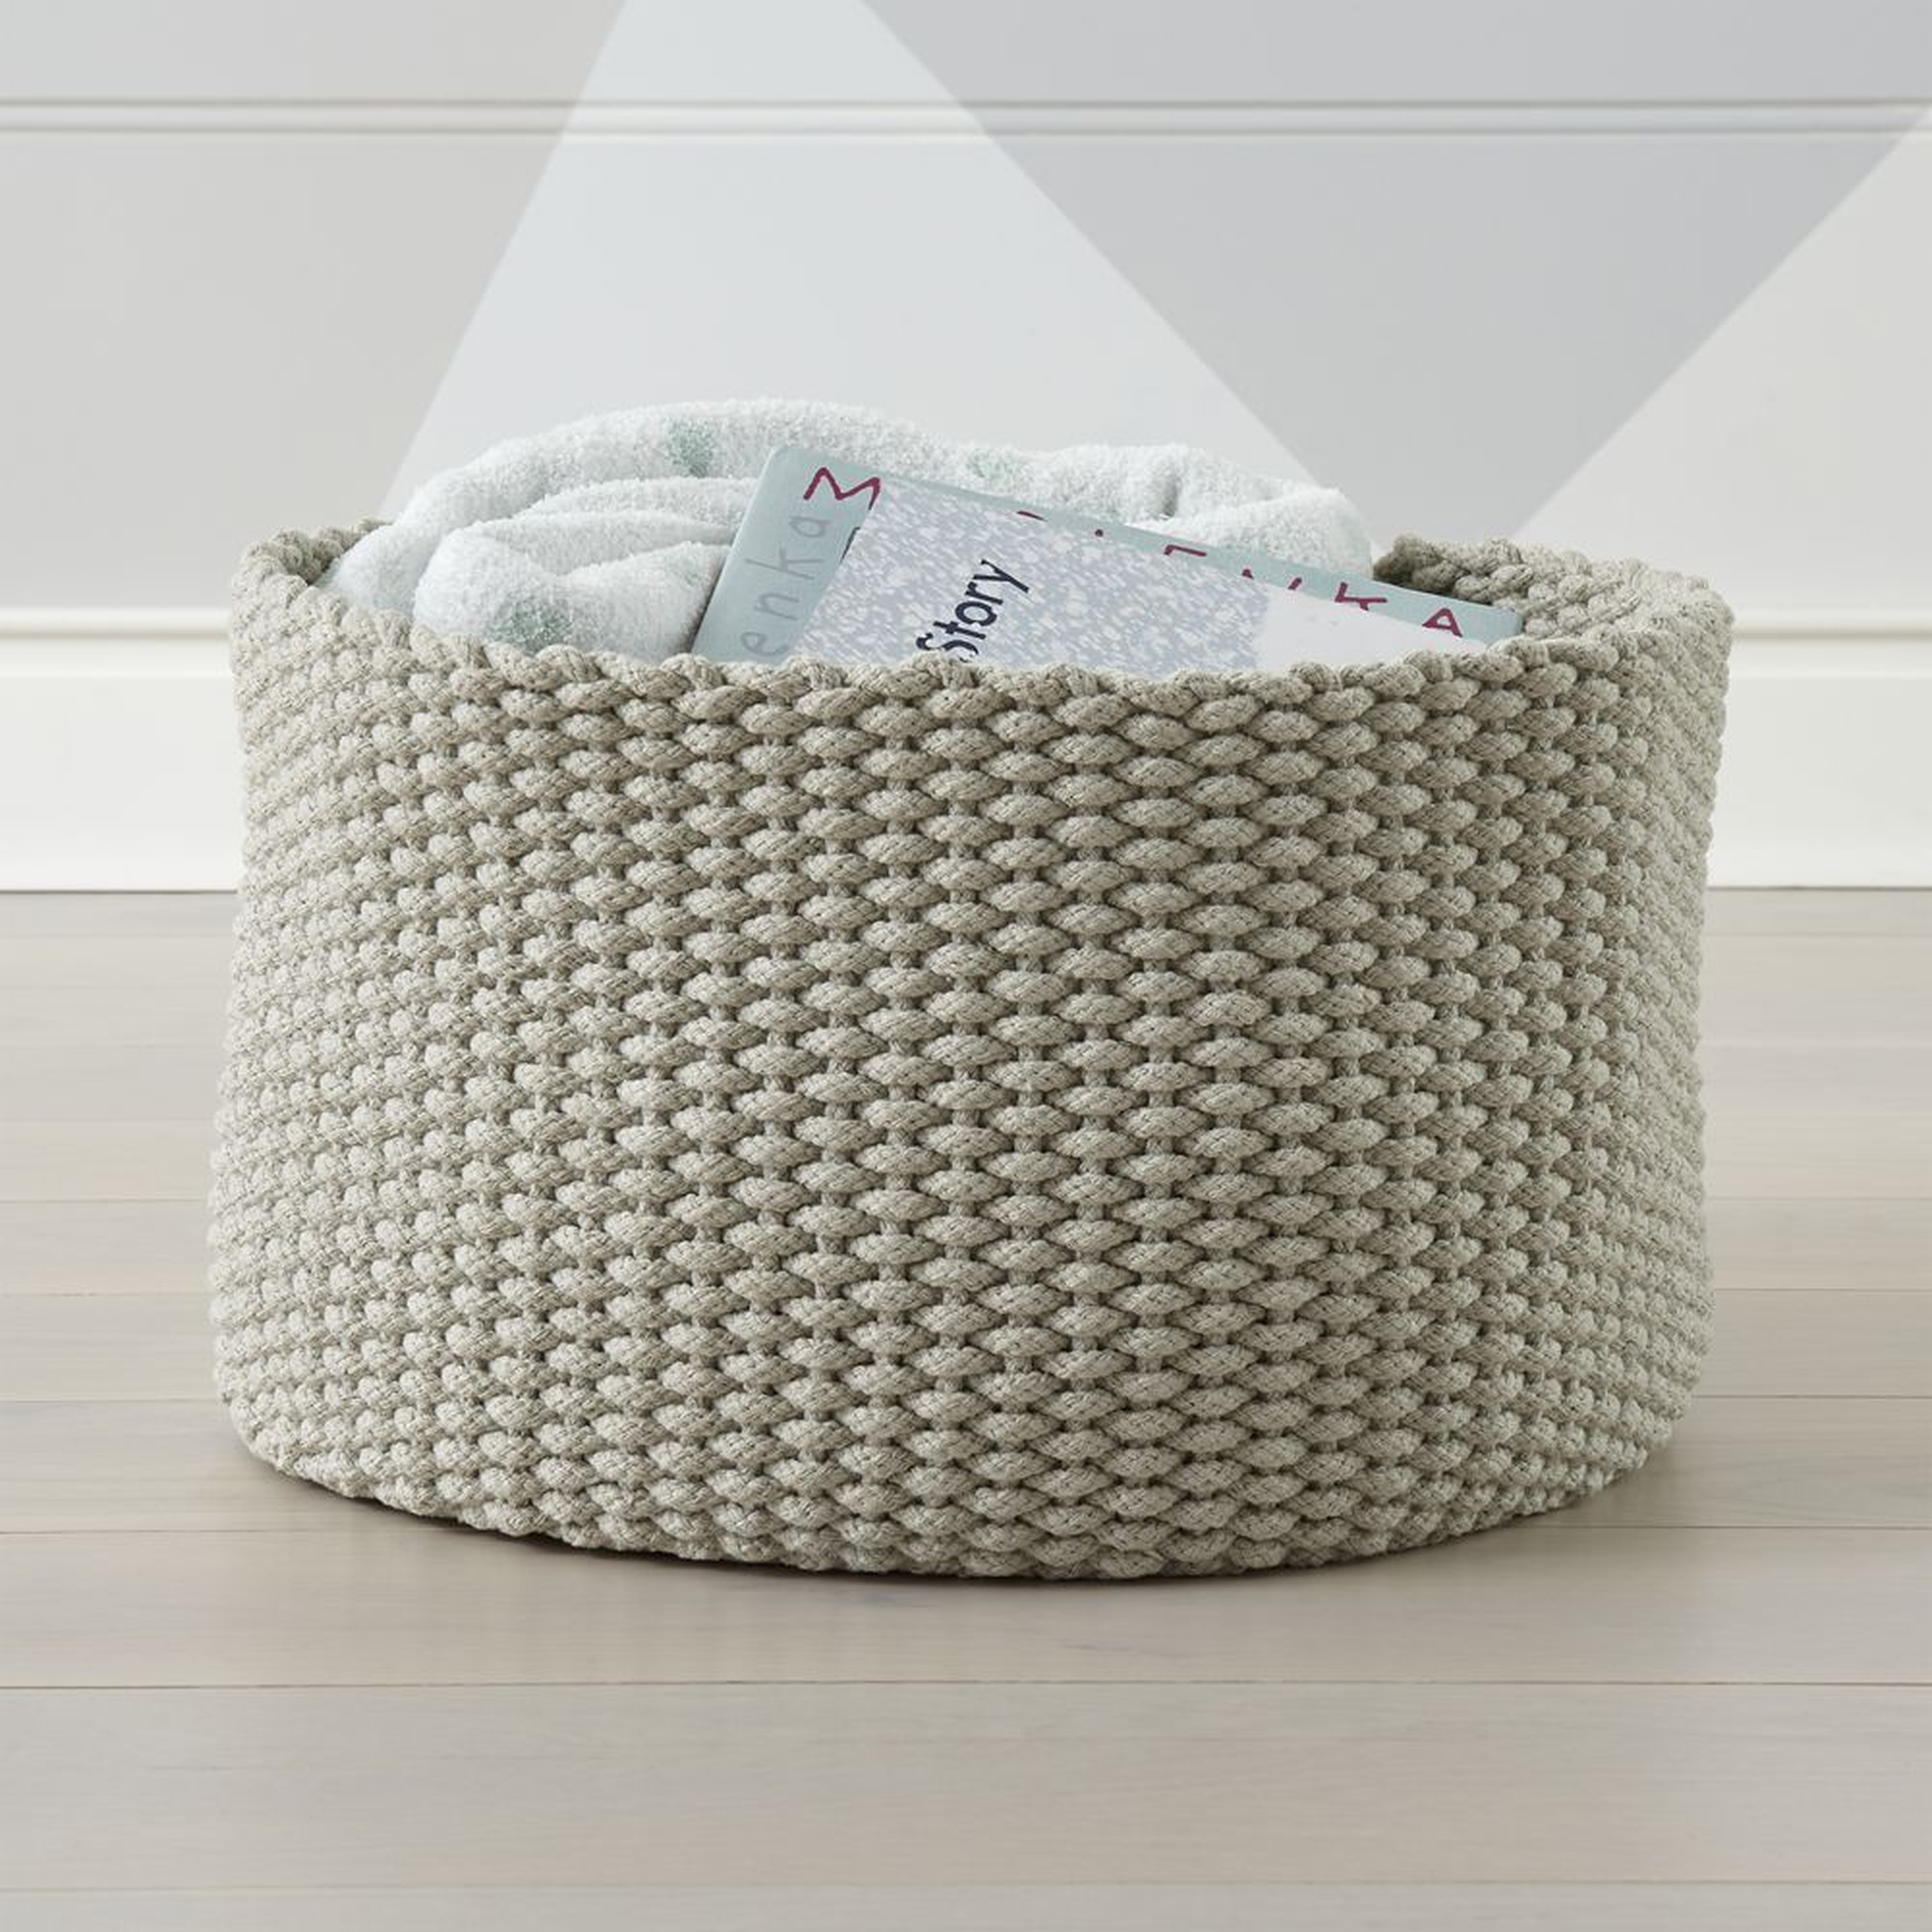 Kneatly Knit Large Khaki Rope Bin - Crate and Barrel